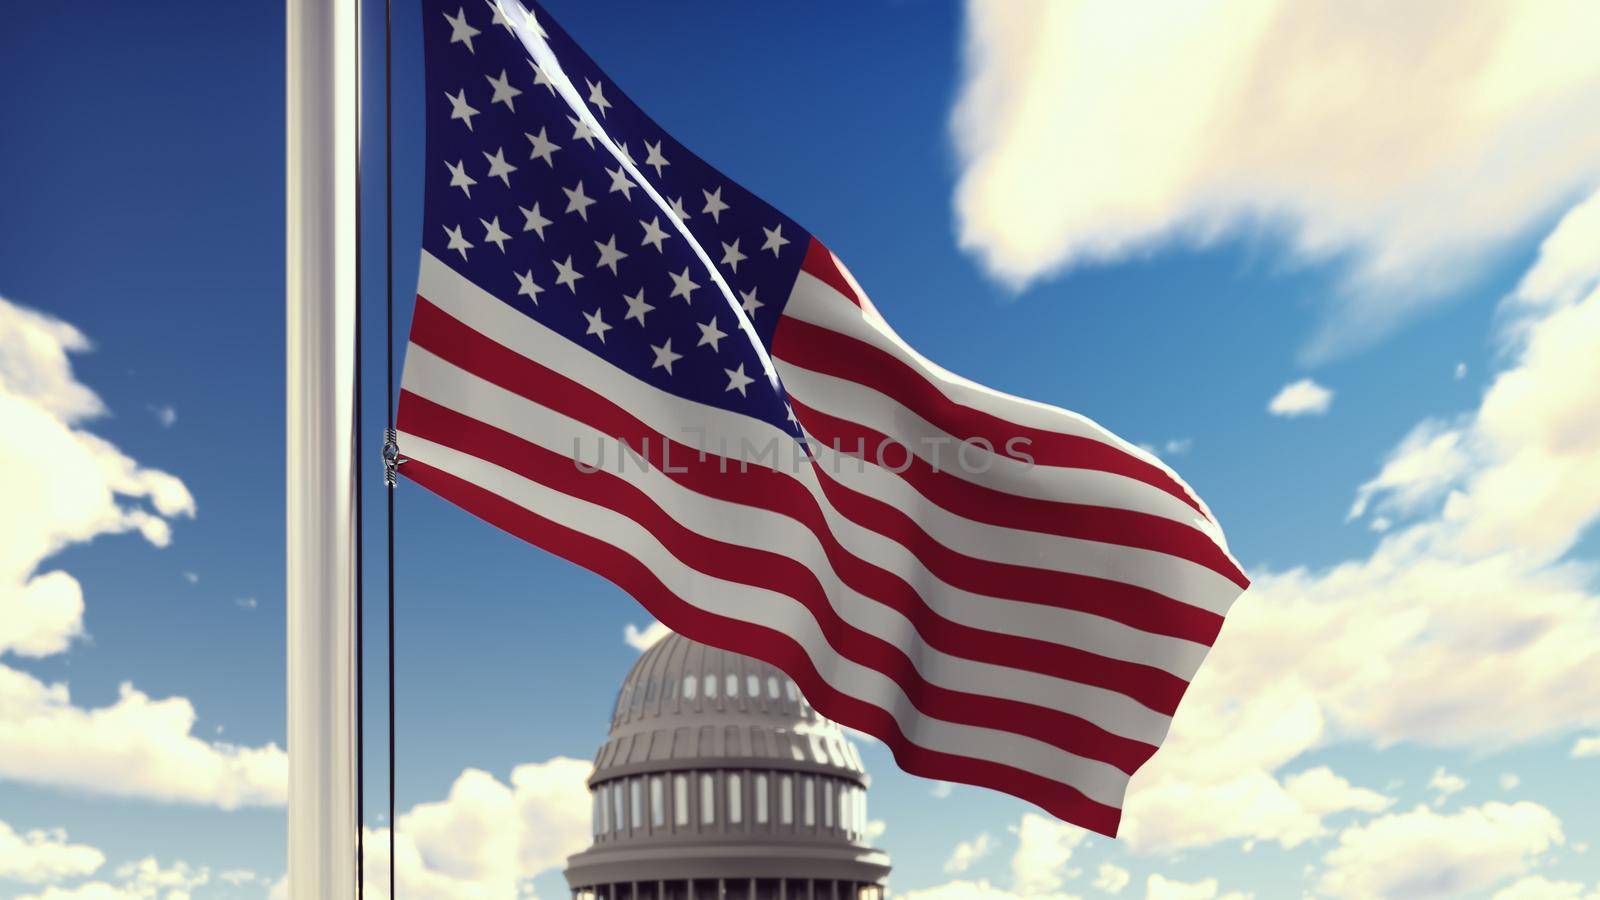 The American flag flutters in the wind on a Sunny day against the blue sky and the Capitol. 3D Rendering by designprojects